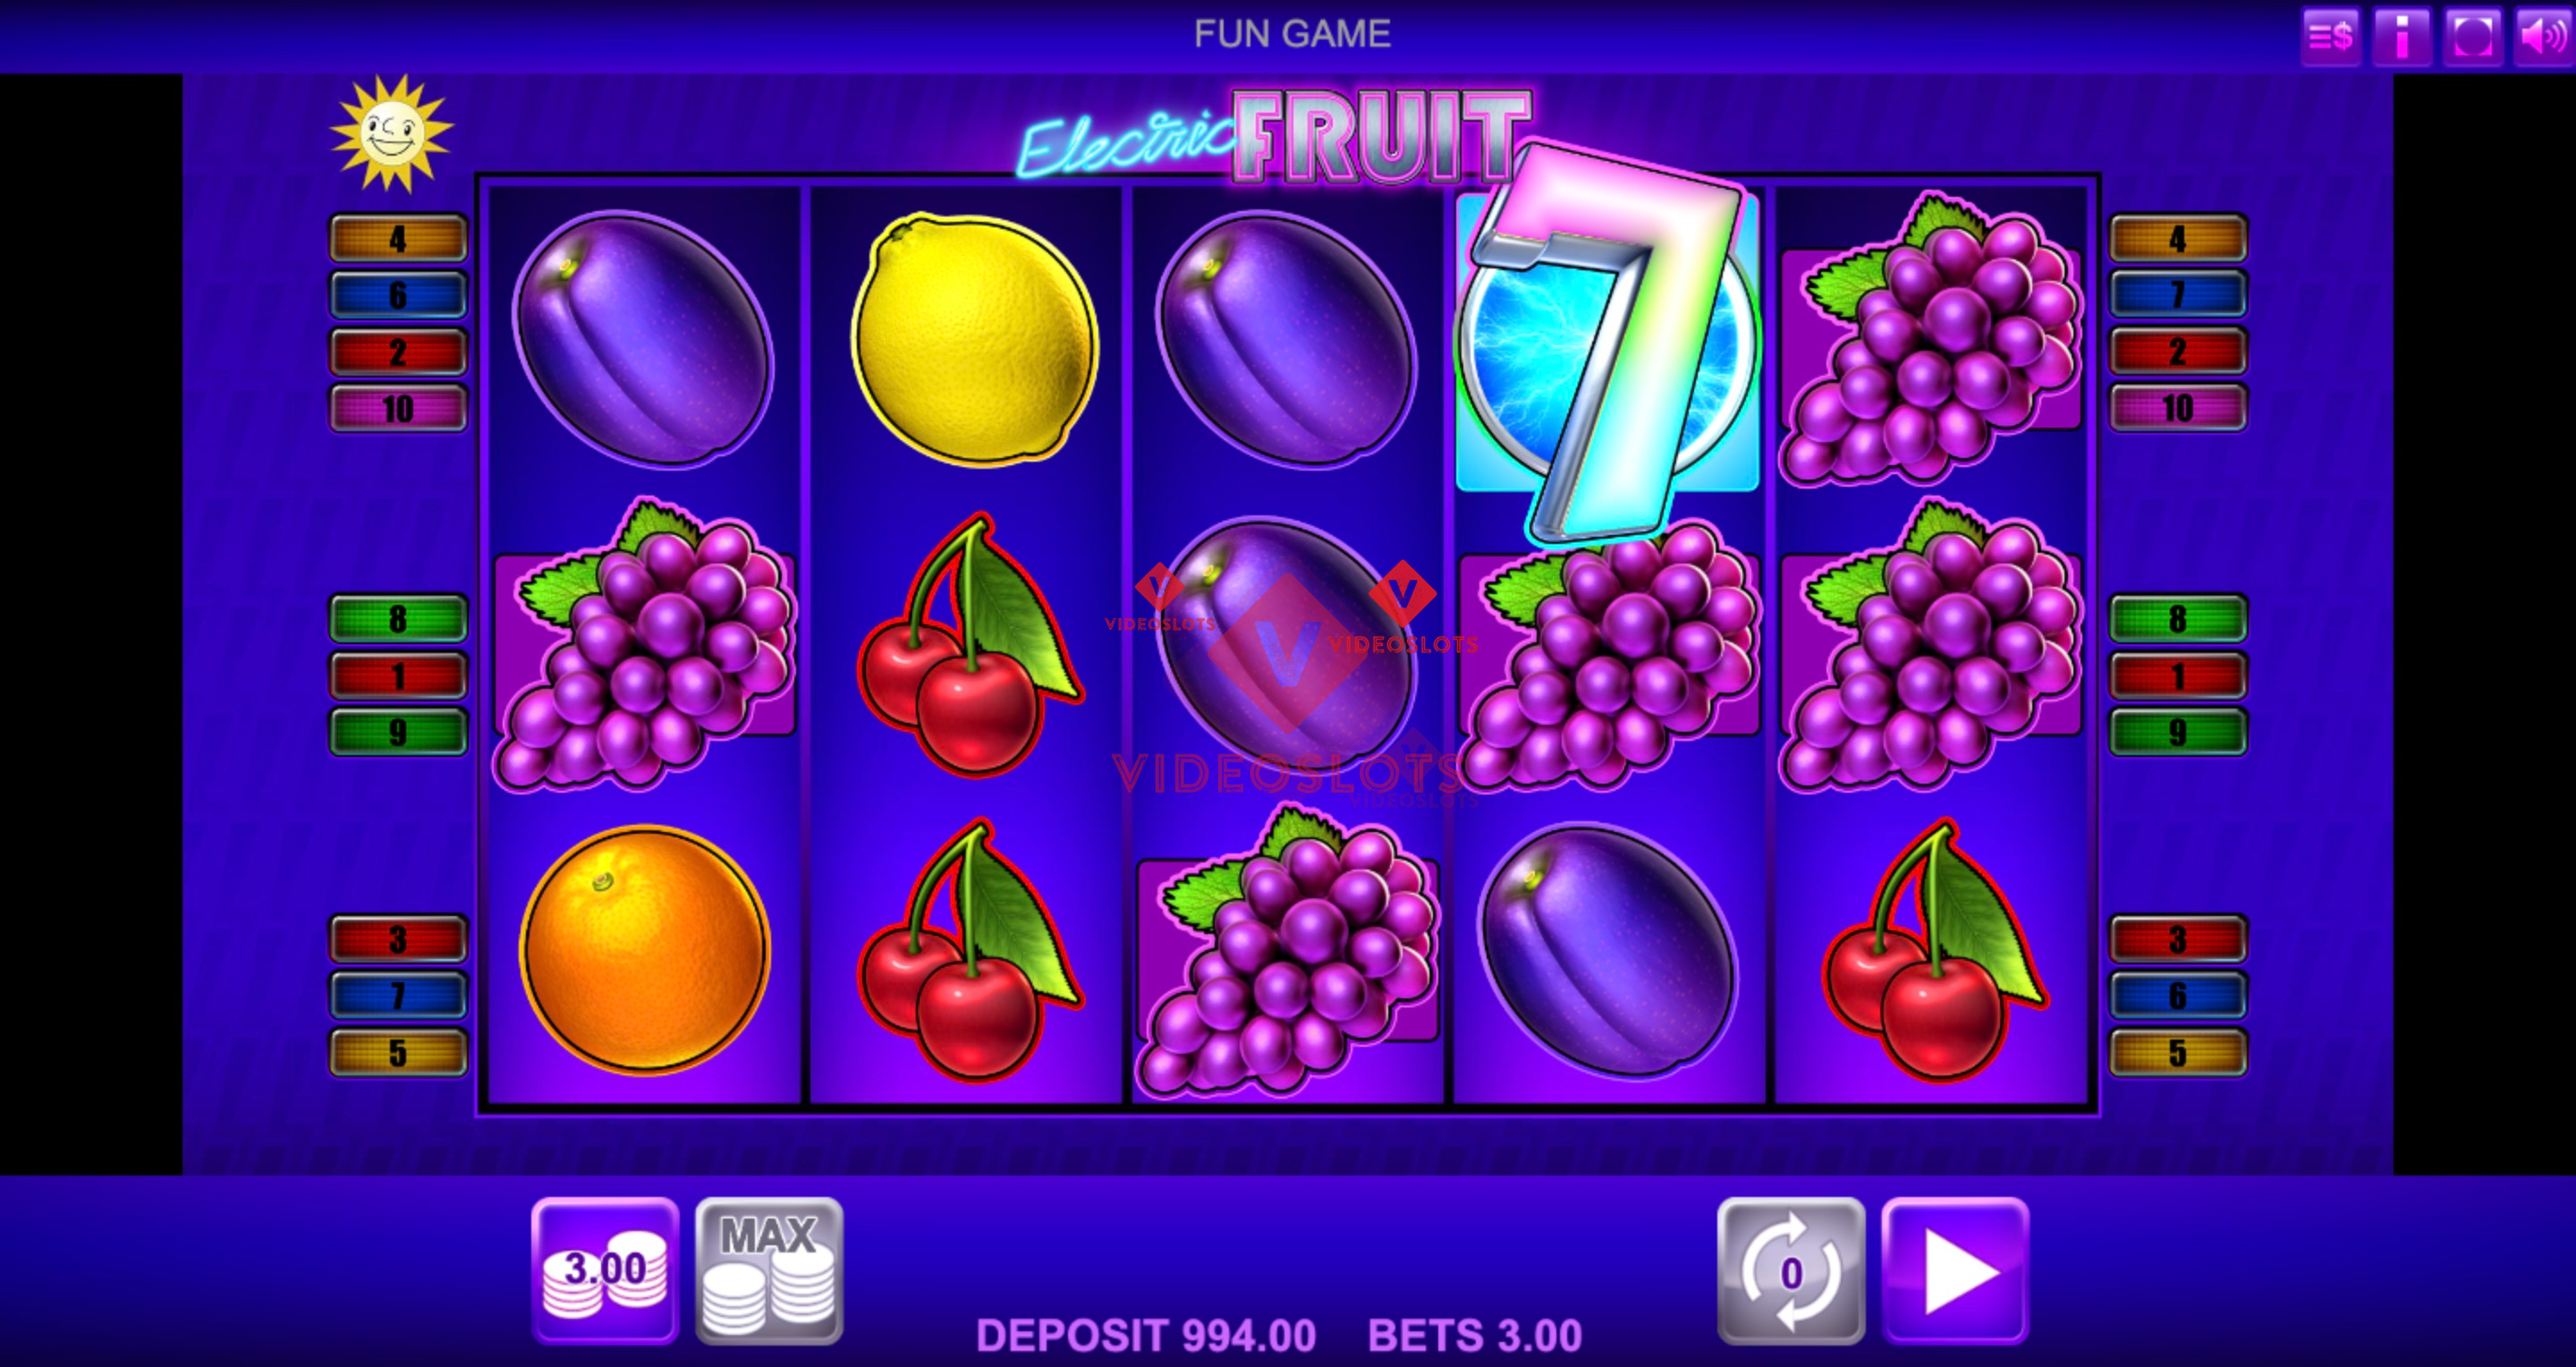 Base Game for Electric Fruit slot from Merkur